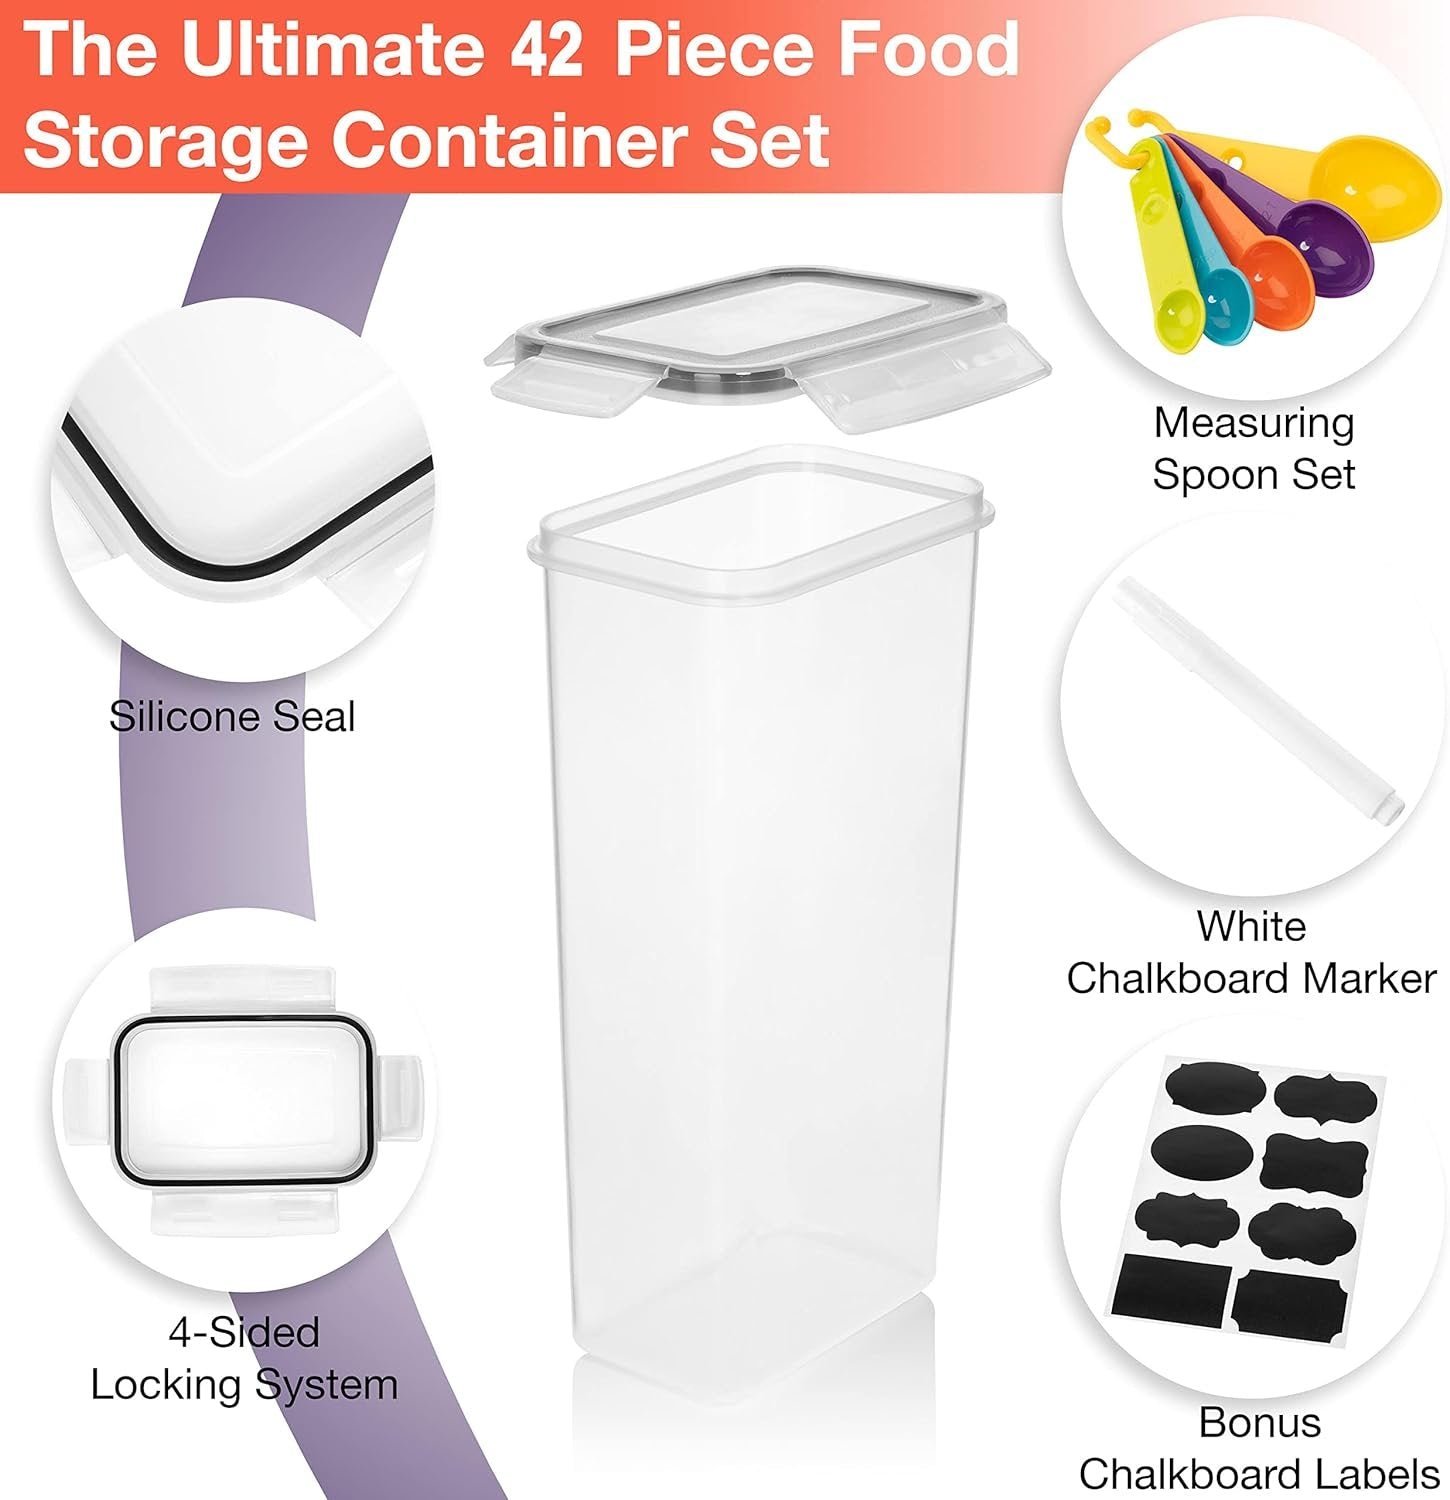 ClearSpace Airtight Food Storage Containers –14 Pack BPA Free Kitchen Organization Set for Pantry Organization and Storage, Plastic Canisters with Durable Lids Ideal for Cereal, Flour & Sugar (Black)